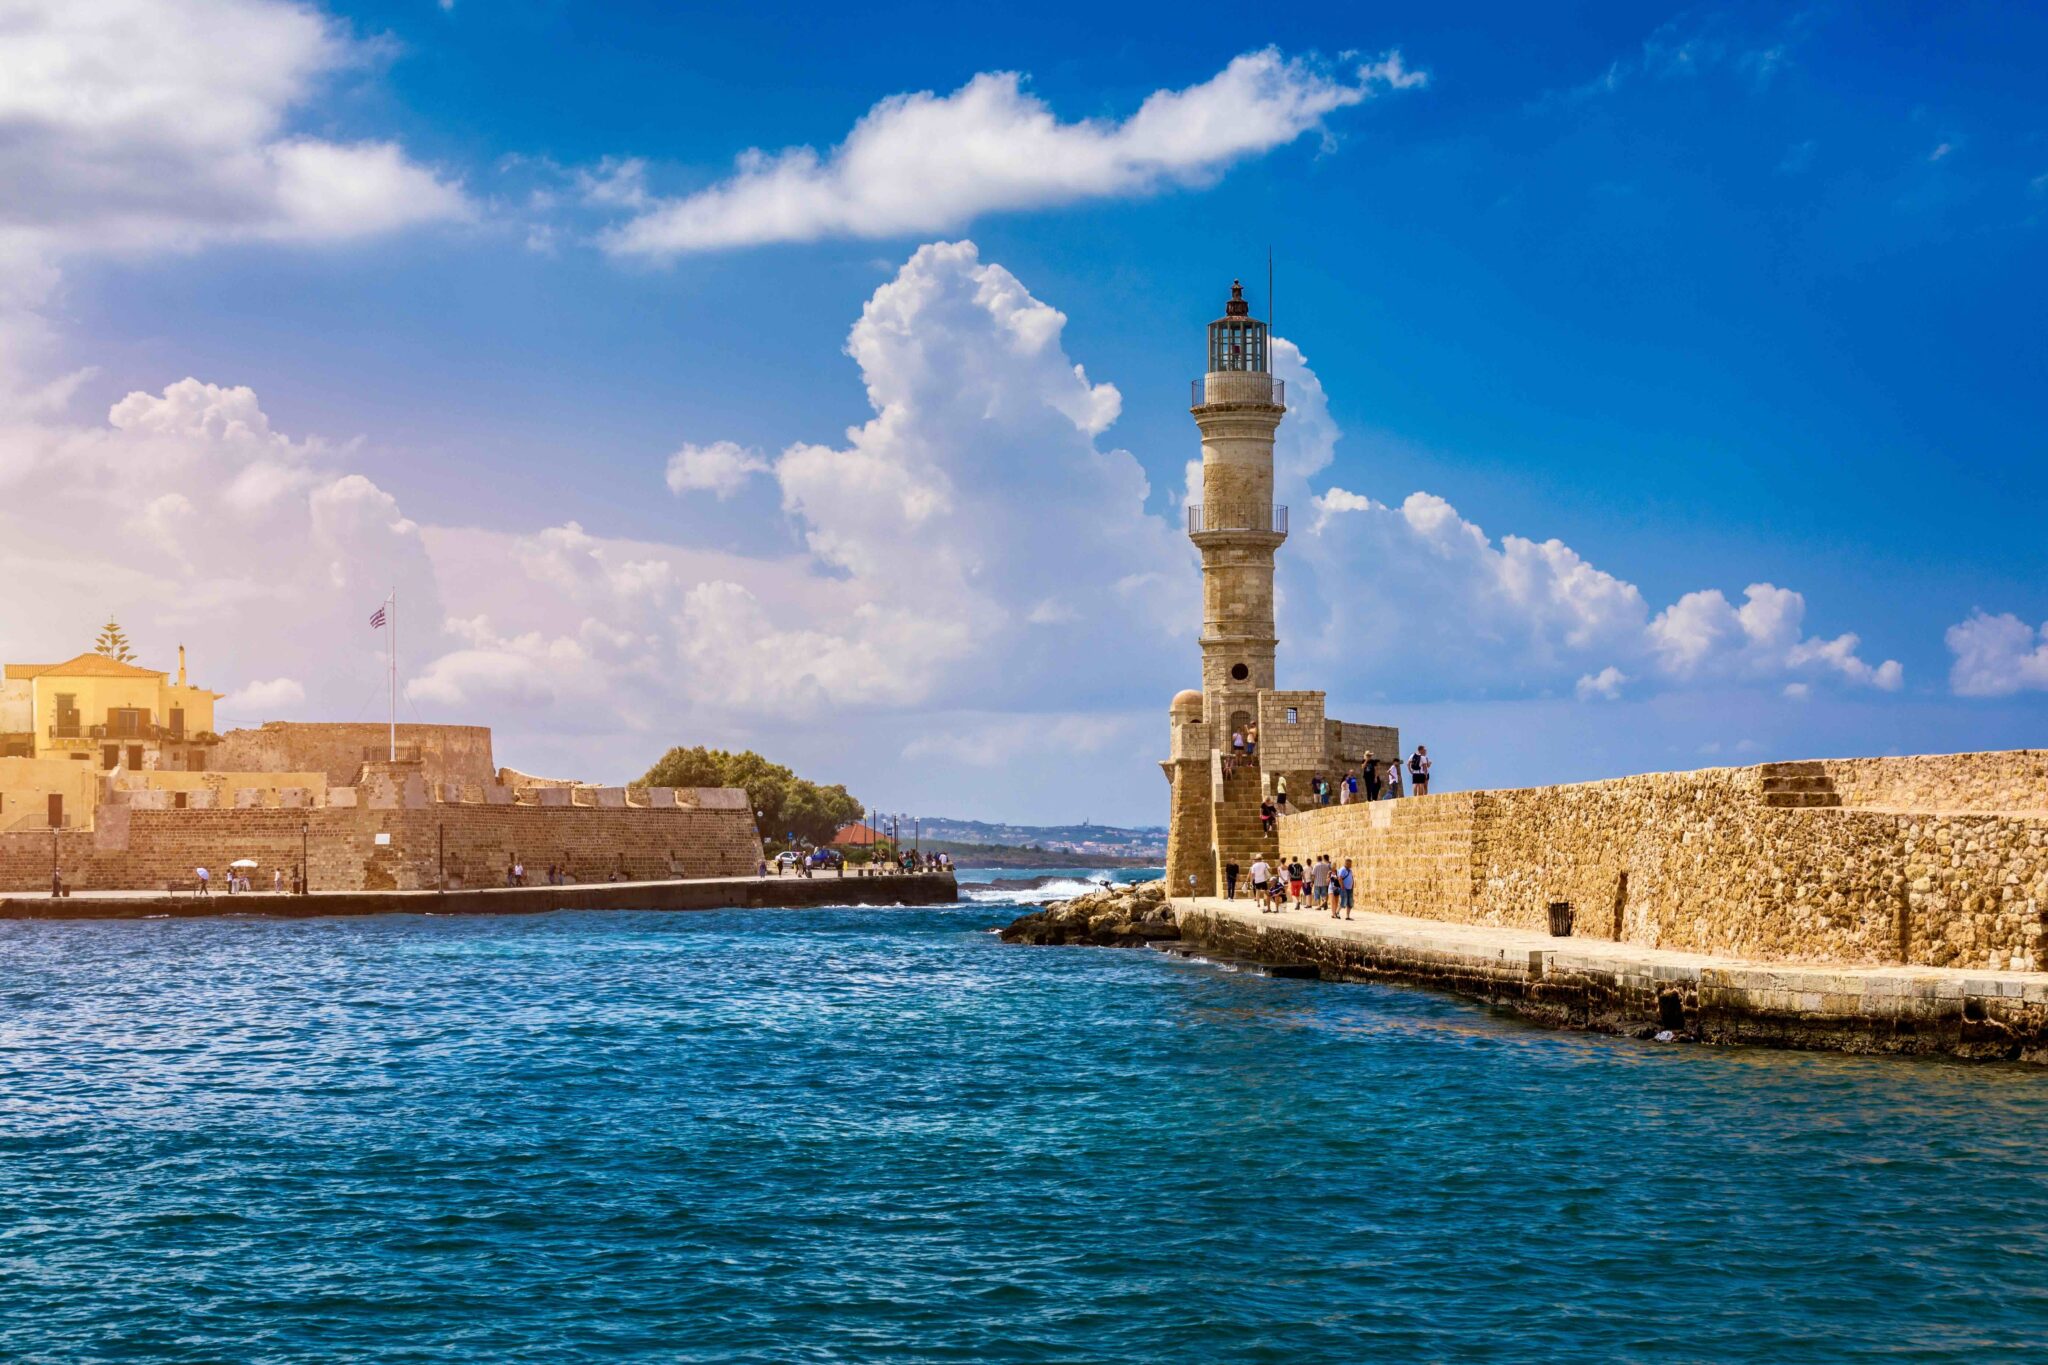 The venetian lighthouse in the old harbor of Chania